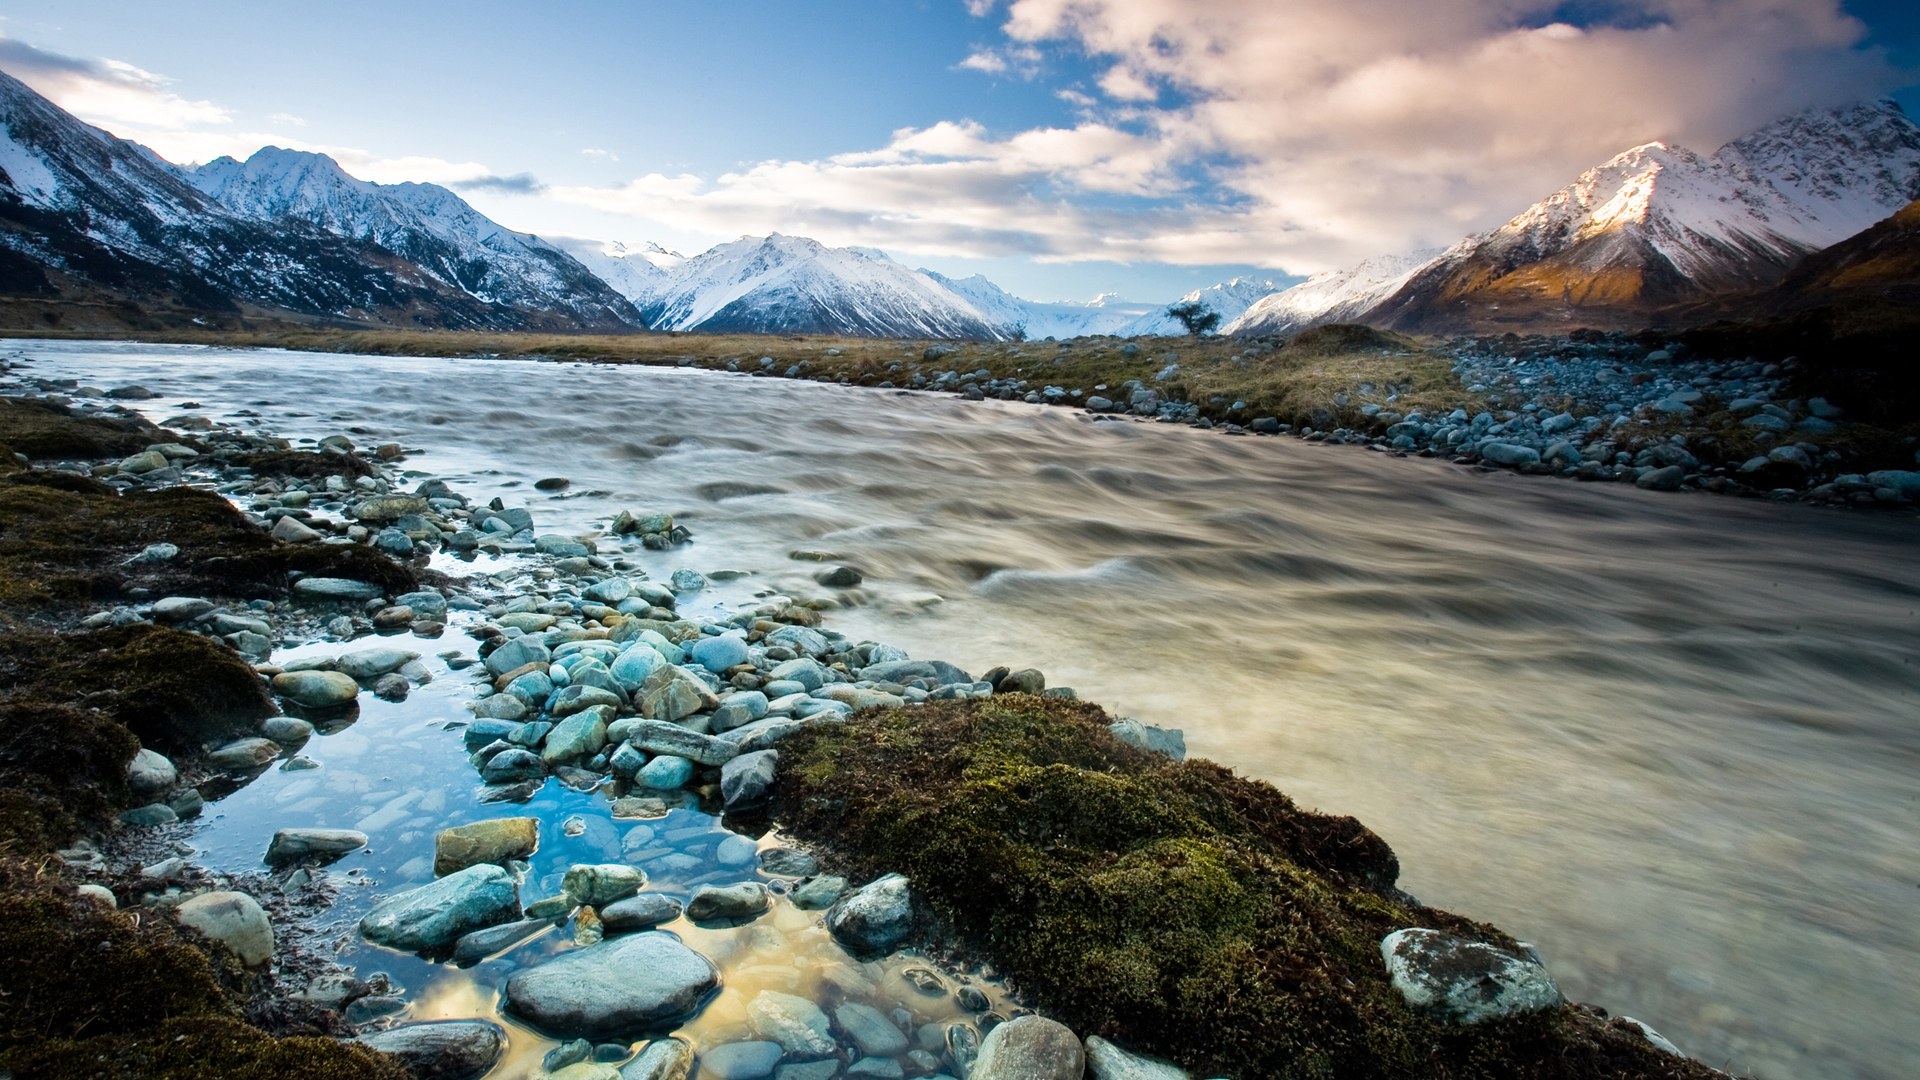 40 Full HD New Zealand Wallpapers For Free Download The Land of the